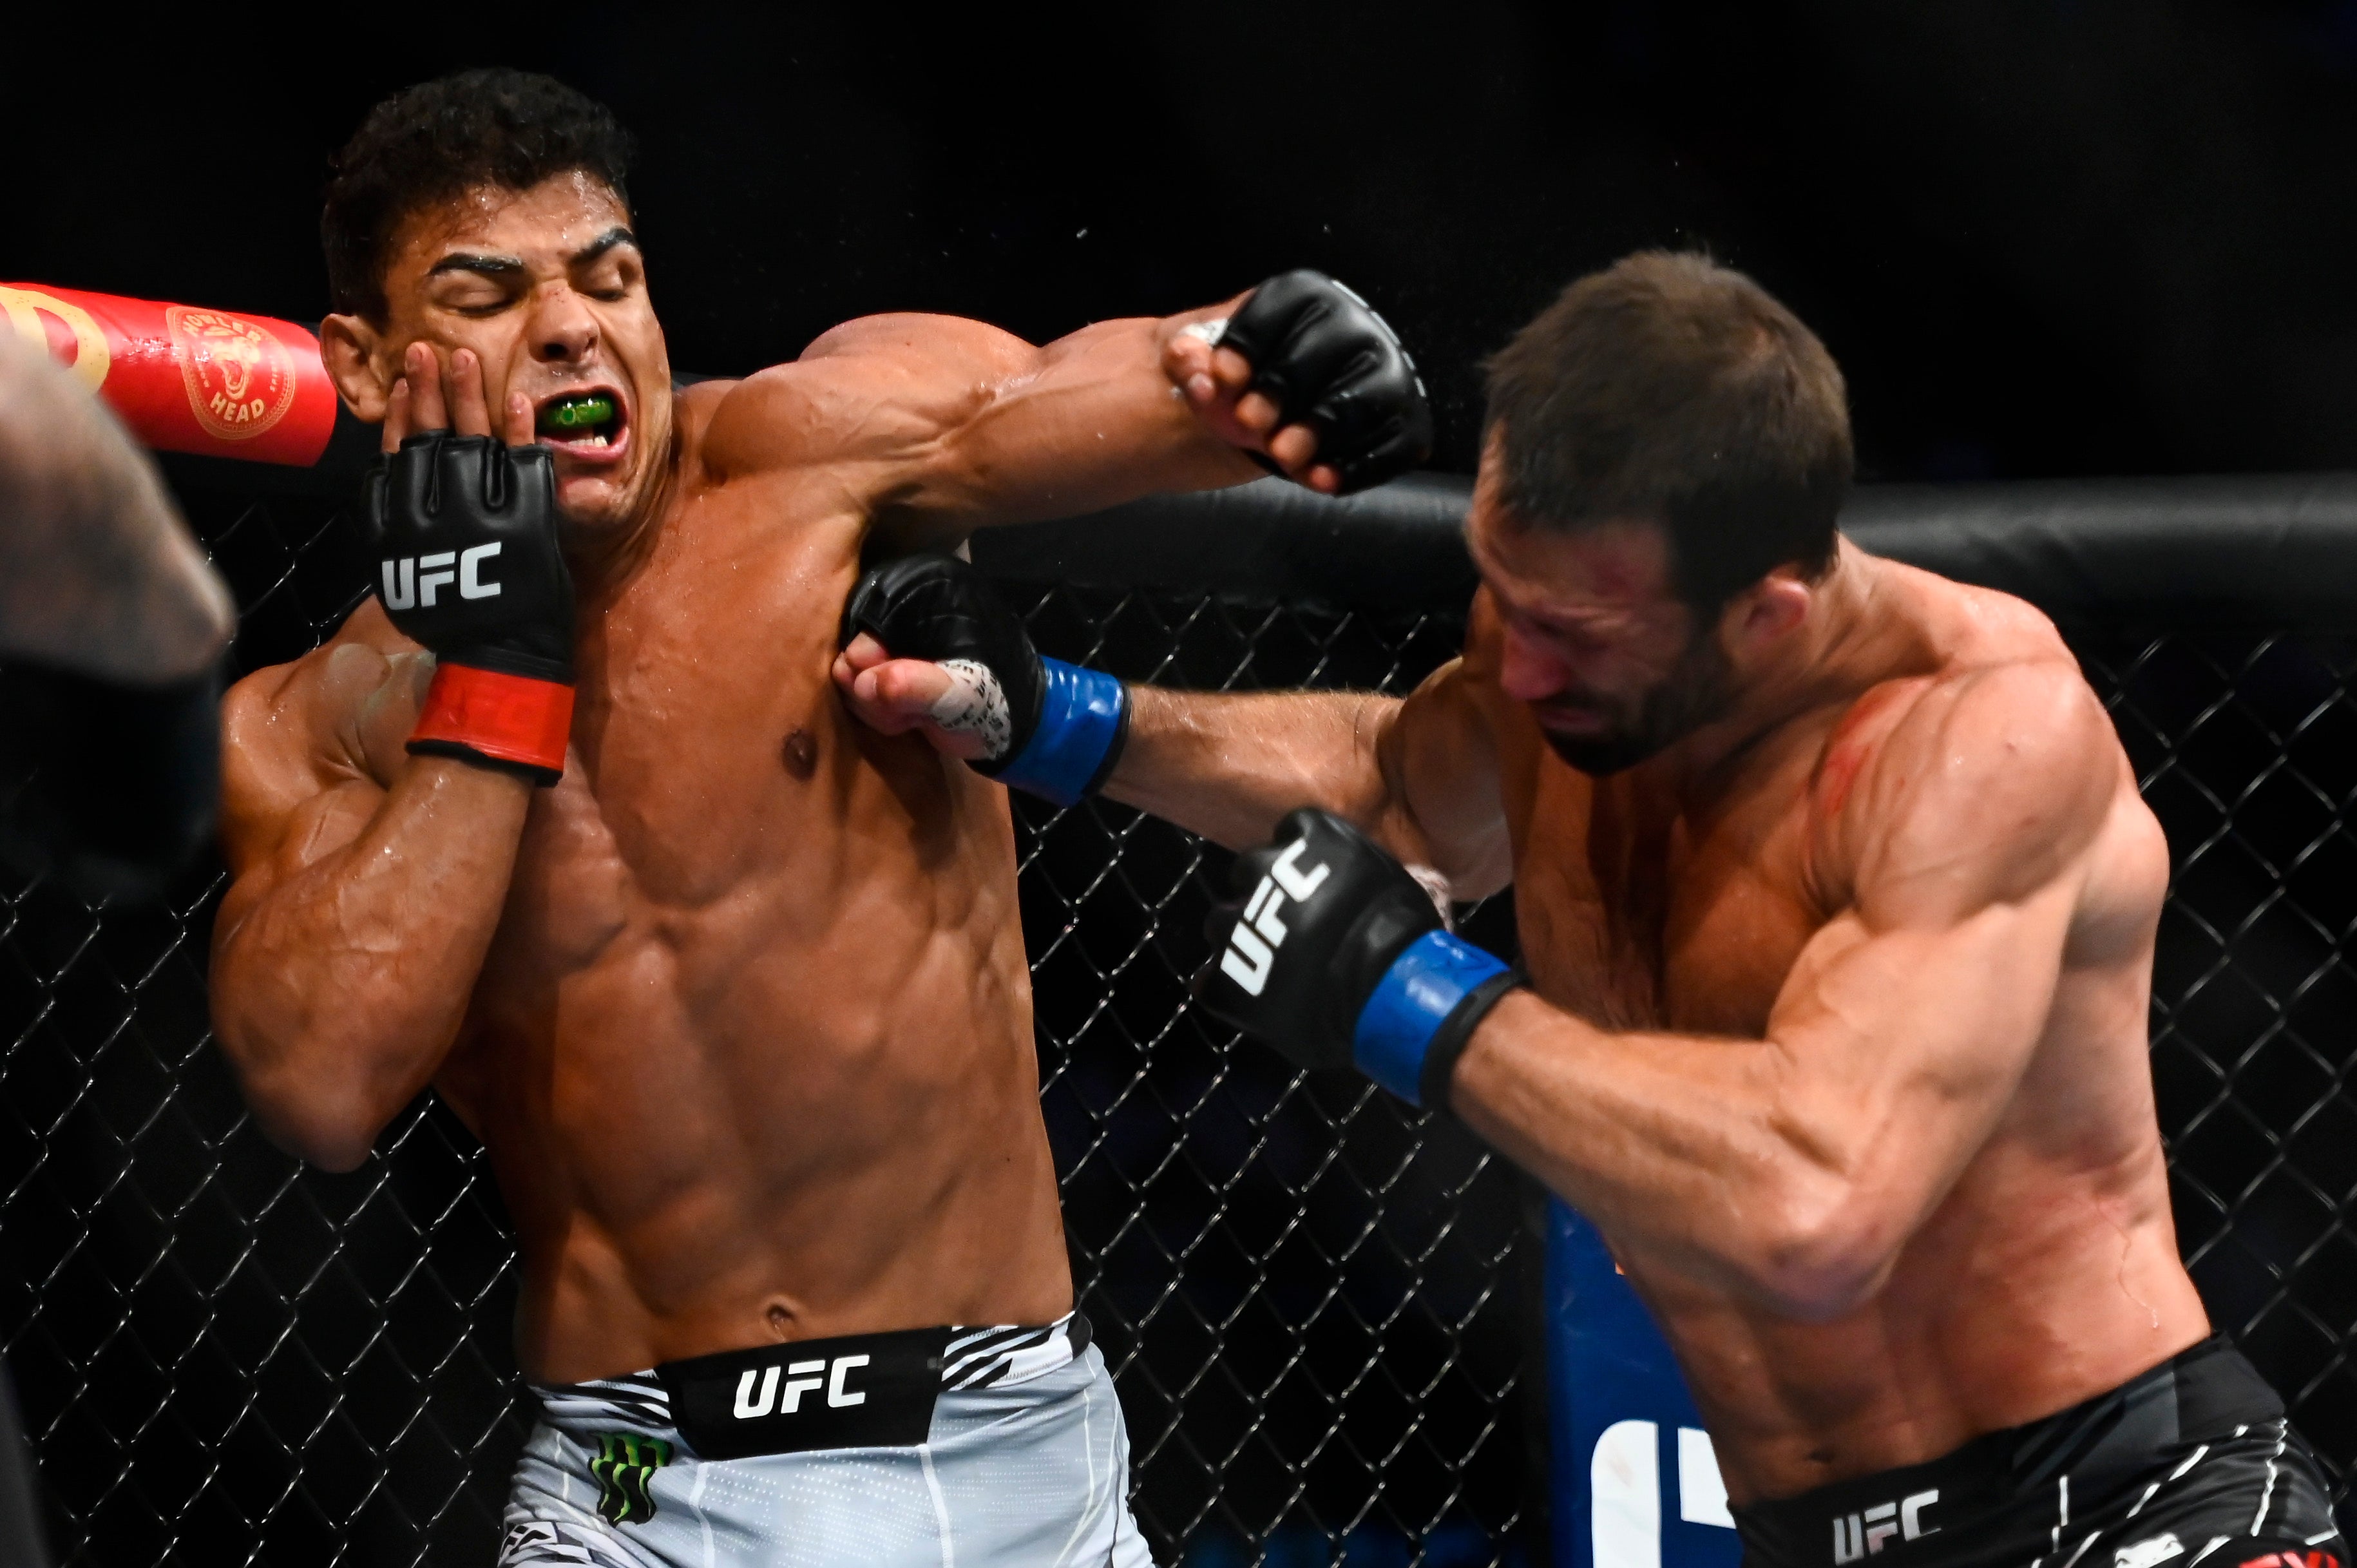 Paulo Costa (left) outpointed Luke Rockhold, who then appeared to retire from MMA